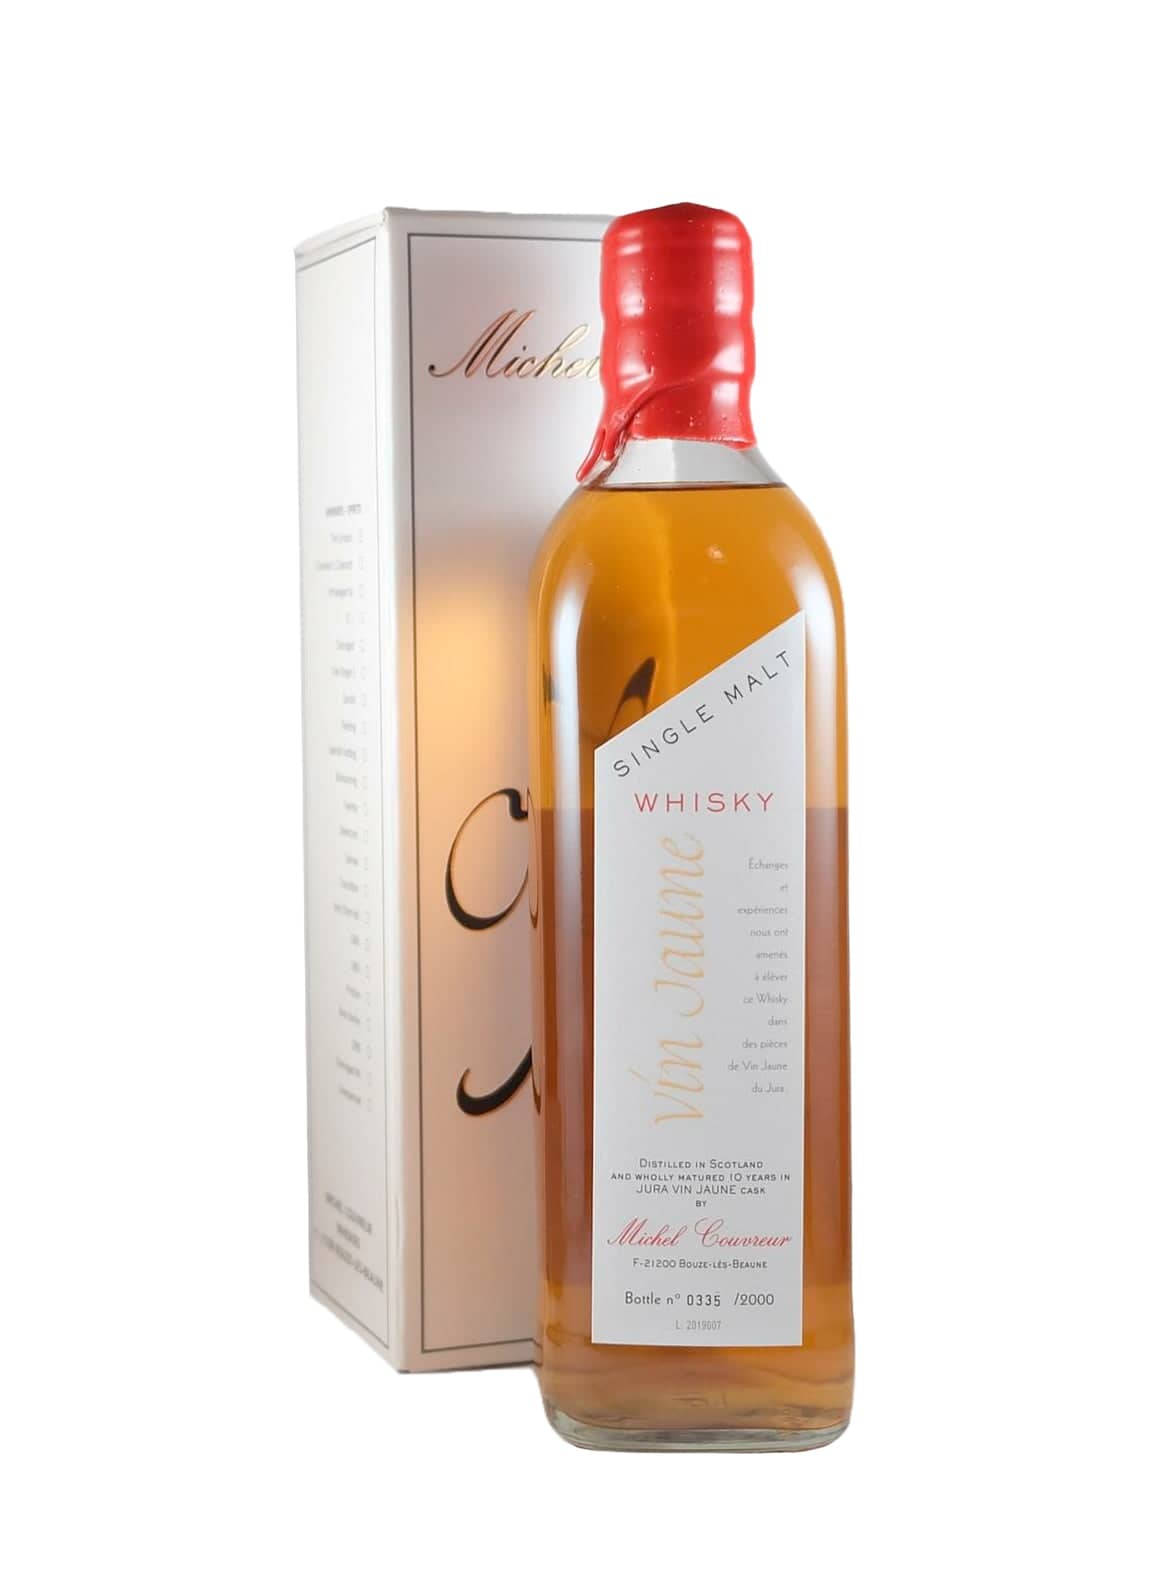 Michel Couvreur Whisky Vin Jaune cask 48% 500ml | Whiskey | Shop online at Spirits of France